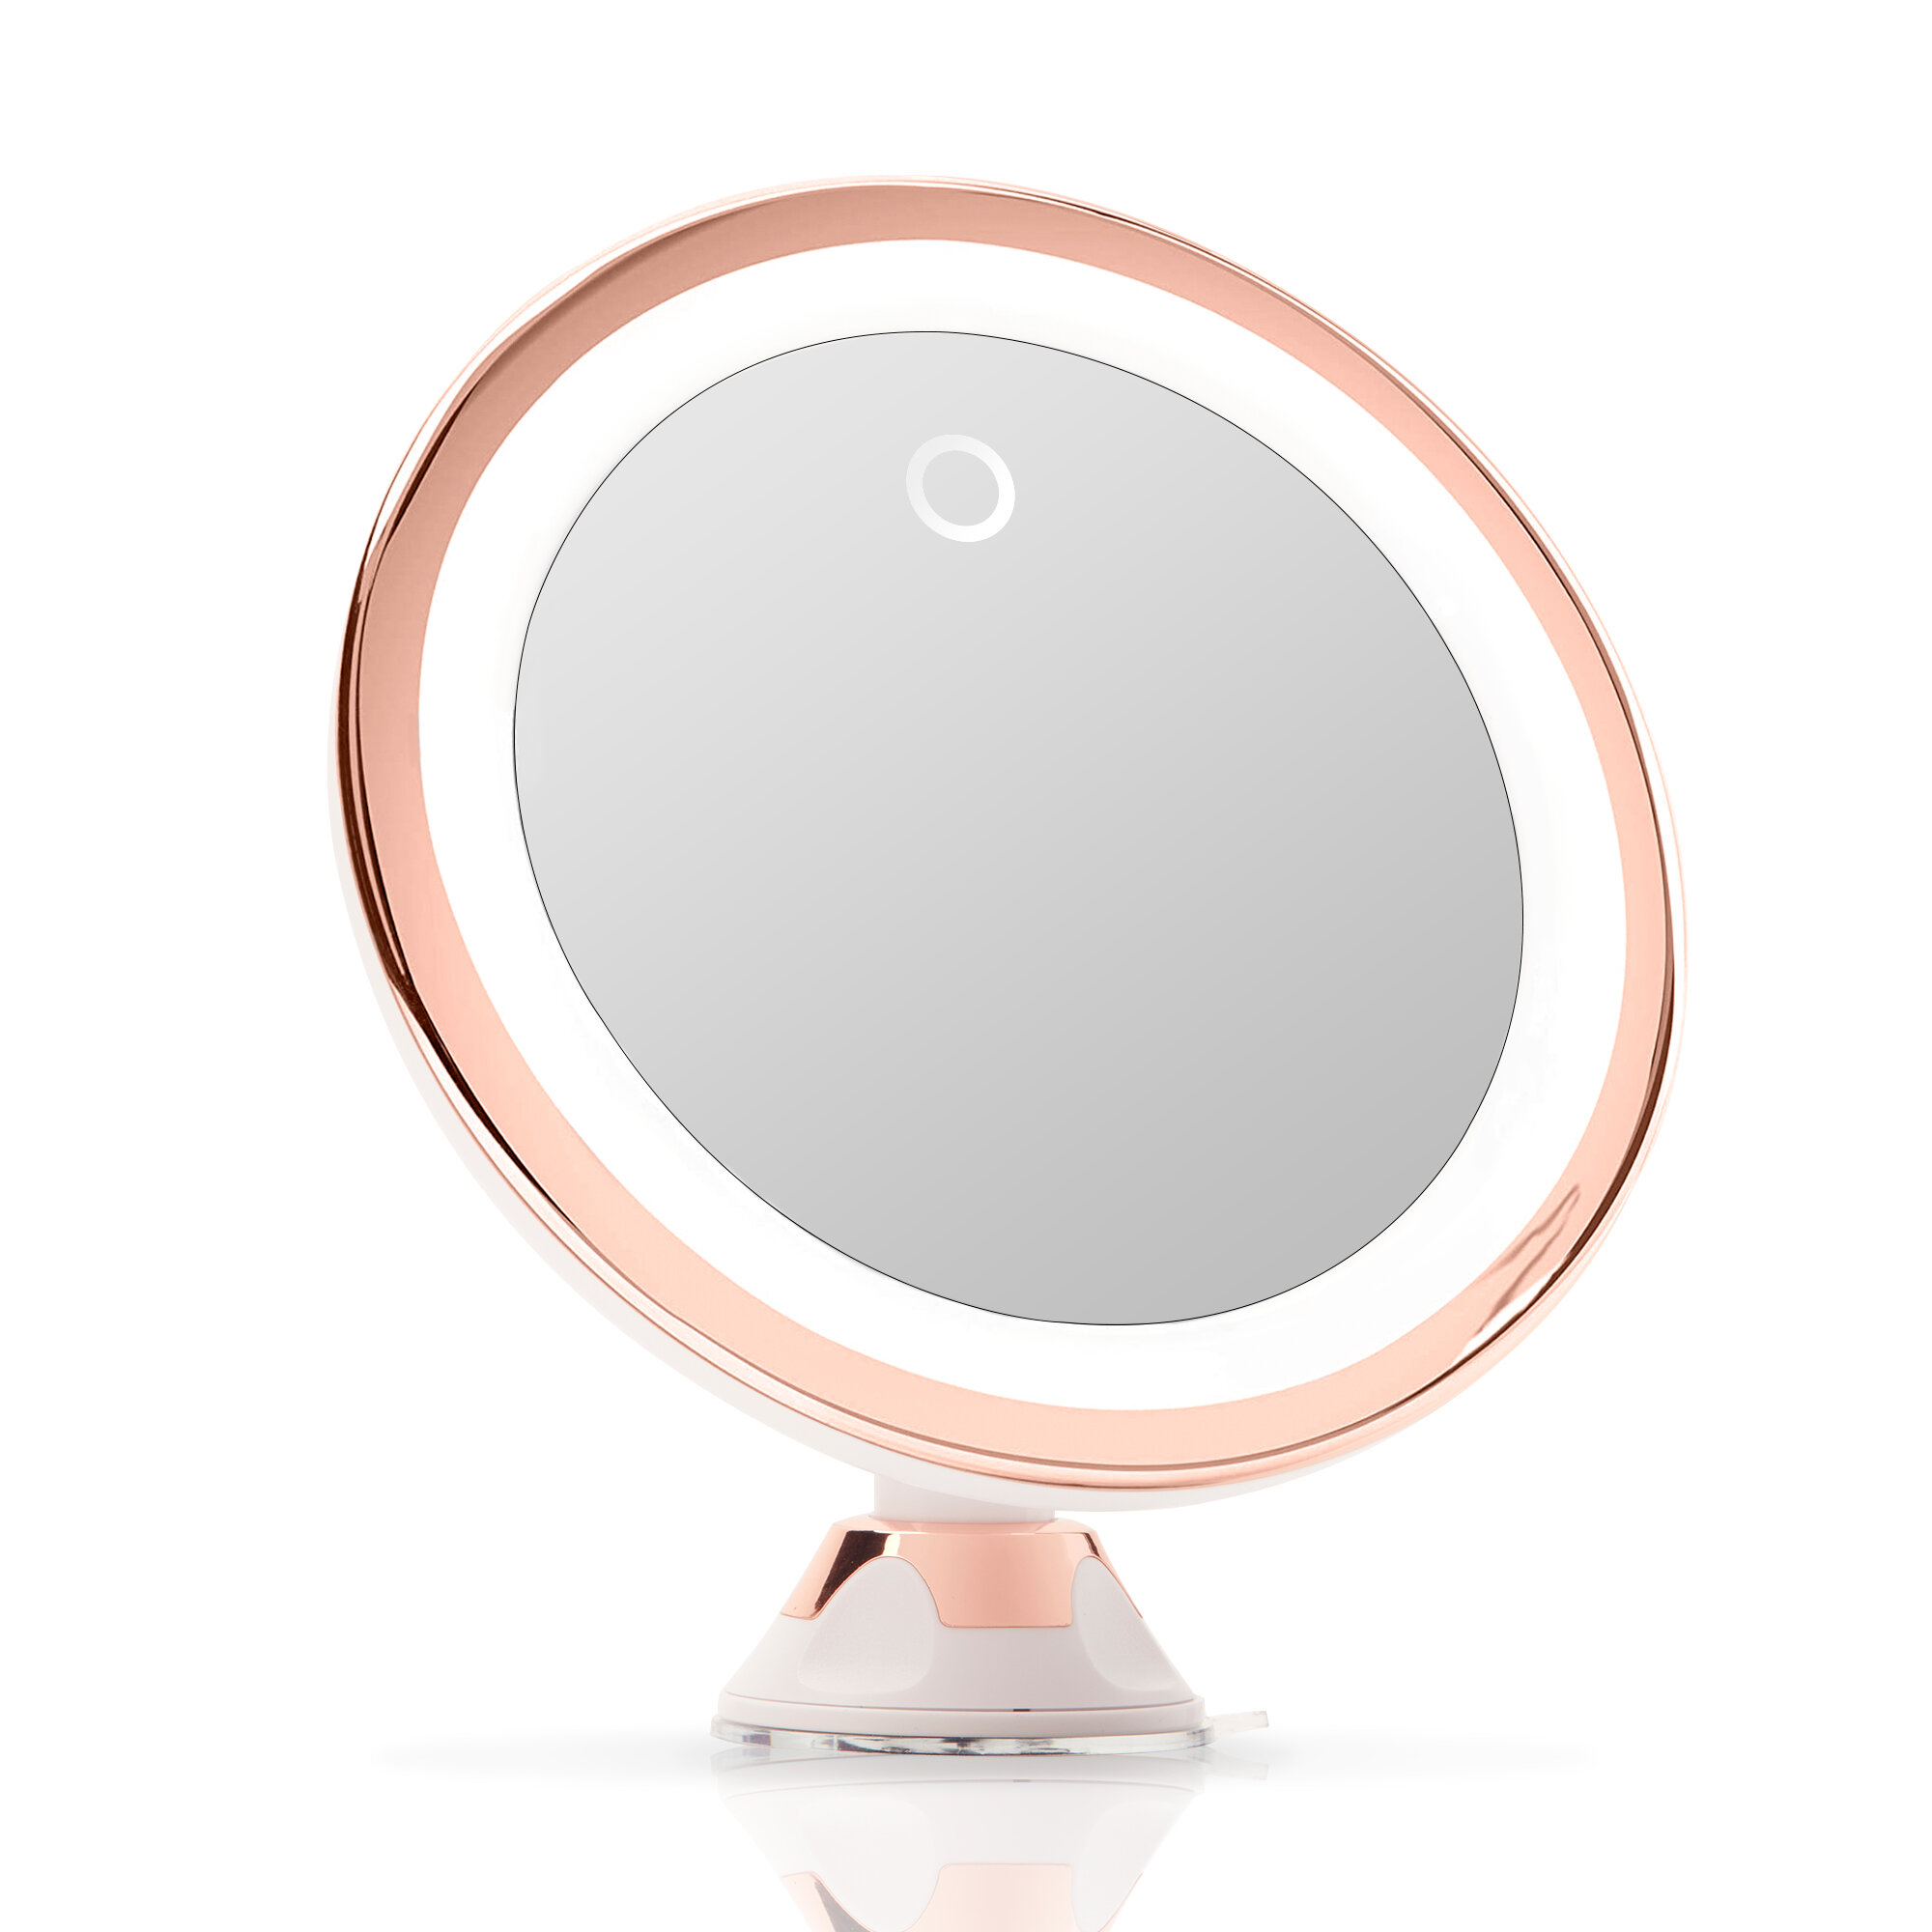 Do Fancii mirrors actually make a difference in your beauty routine?